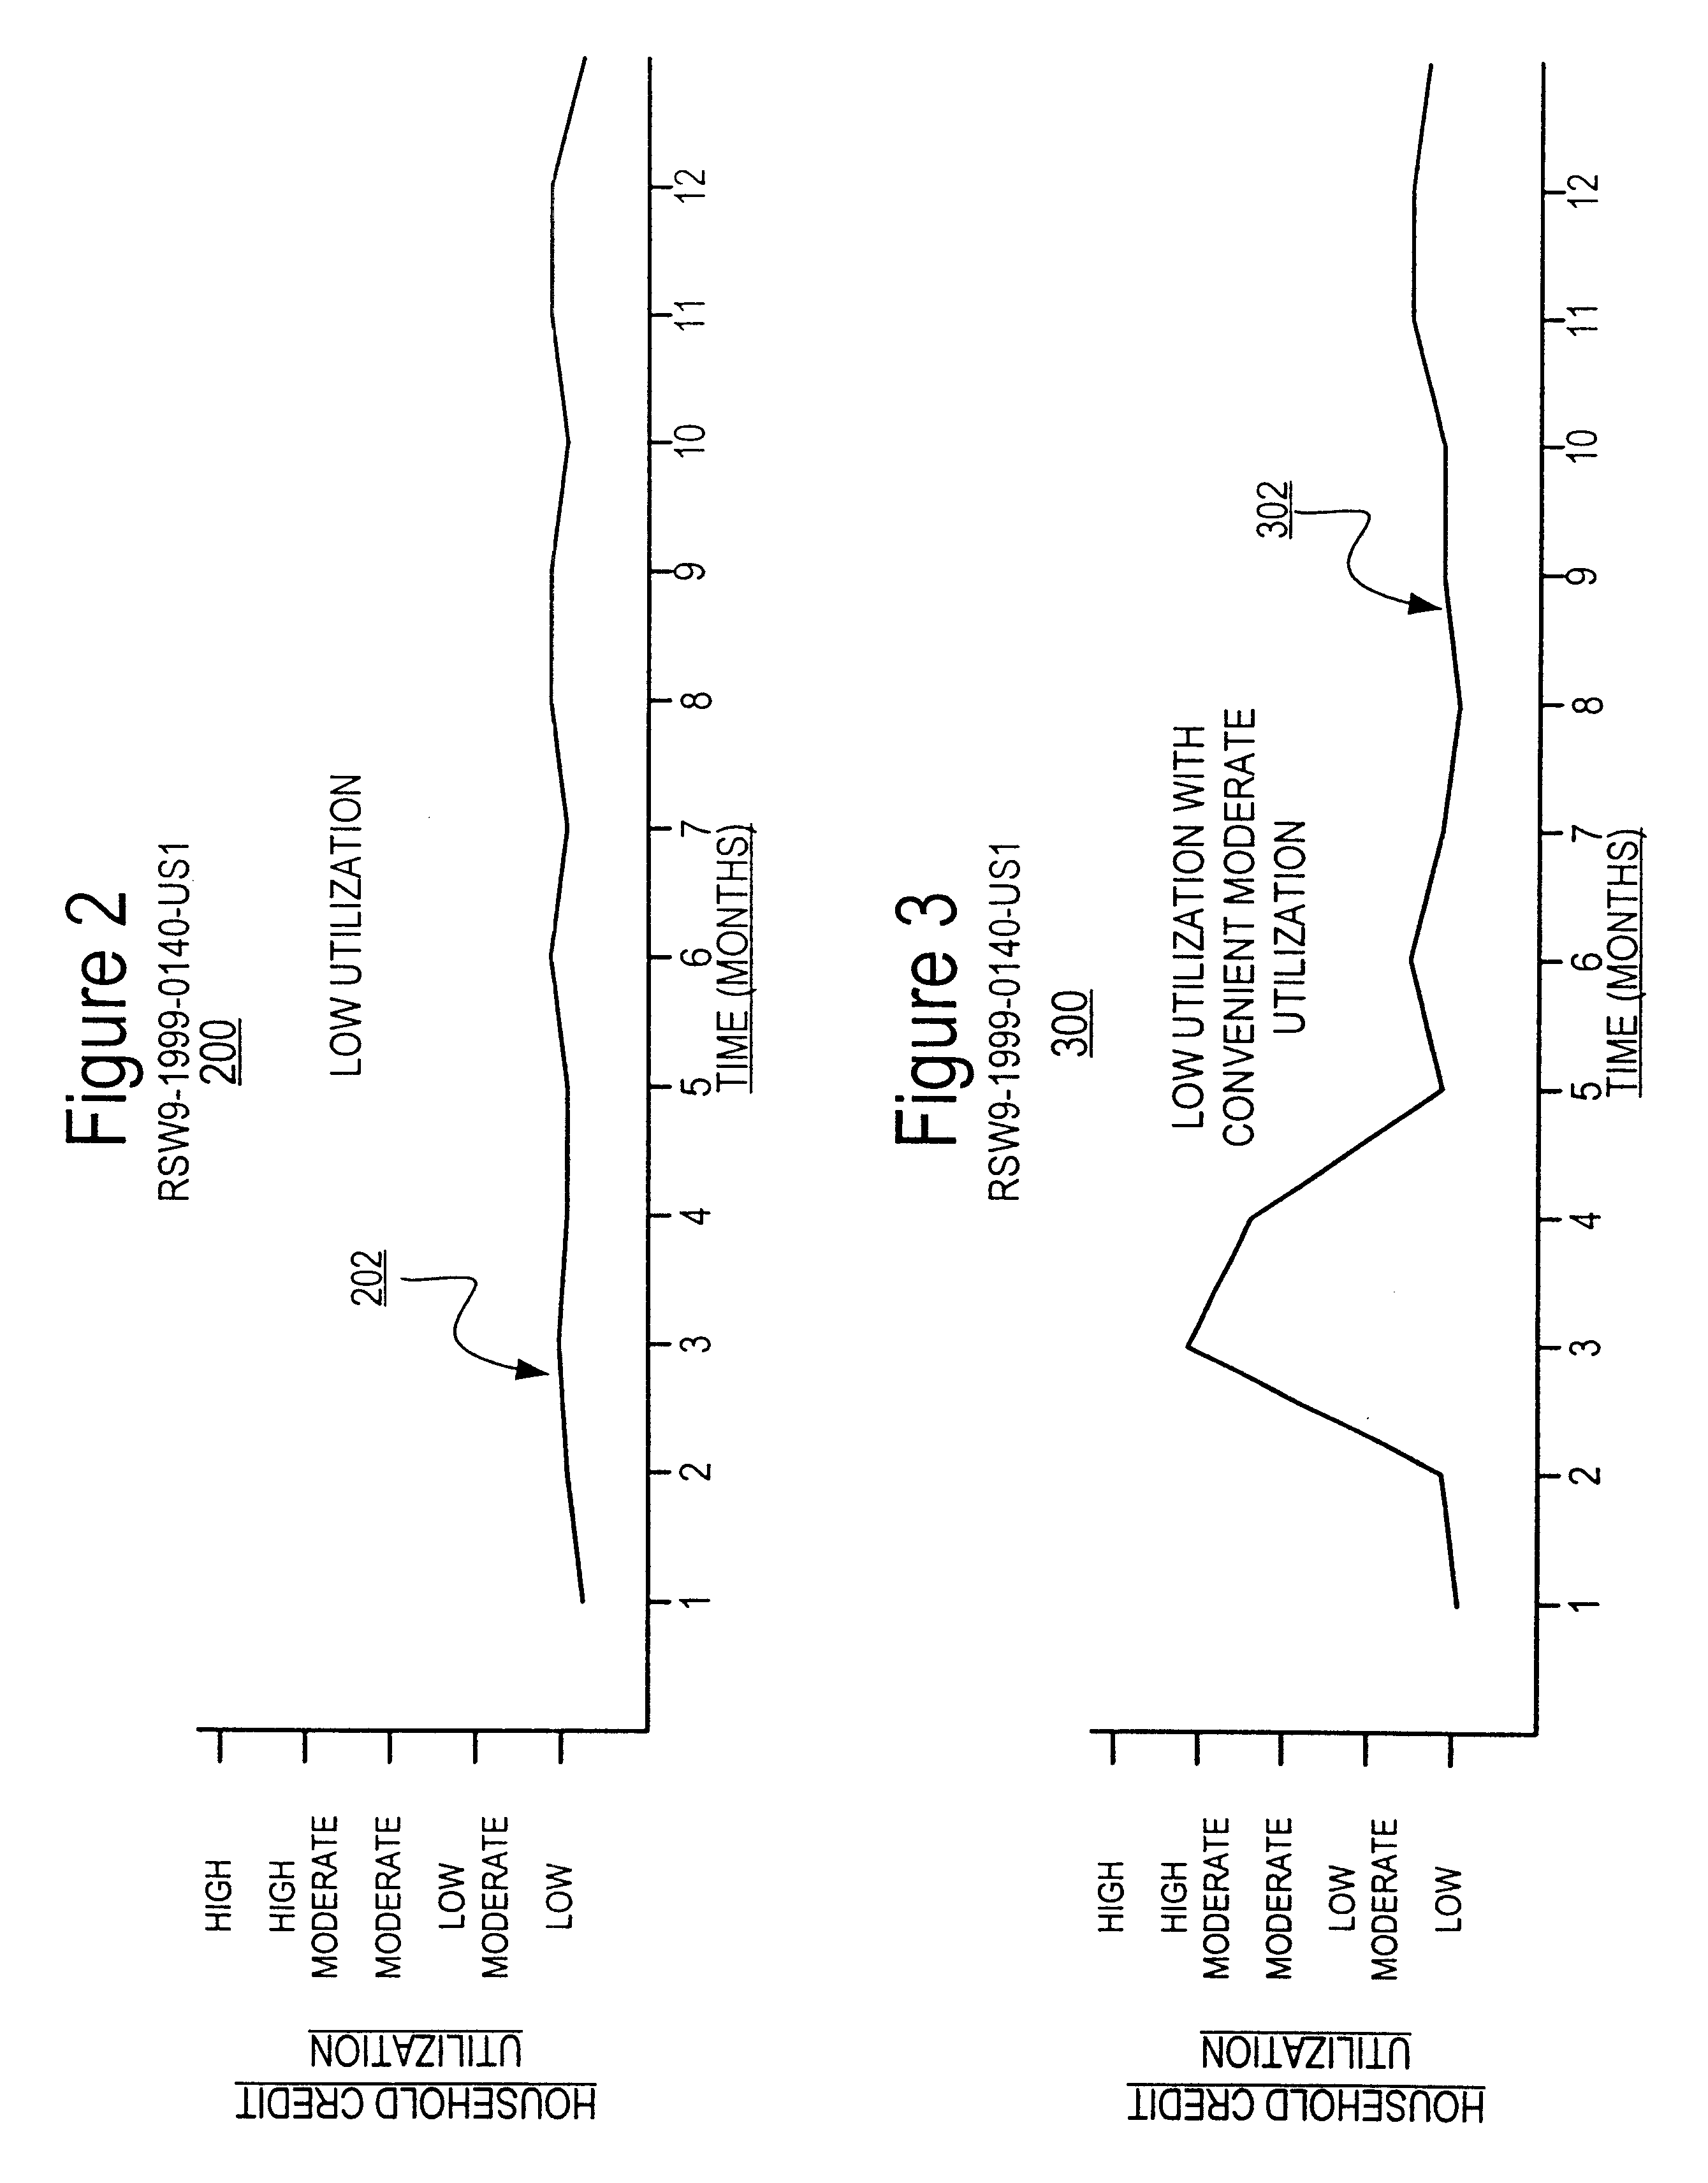 Method and system for identifying consumer credit revolvers with neural network time series segmentation